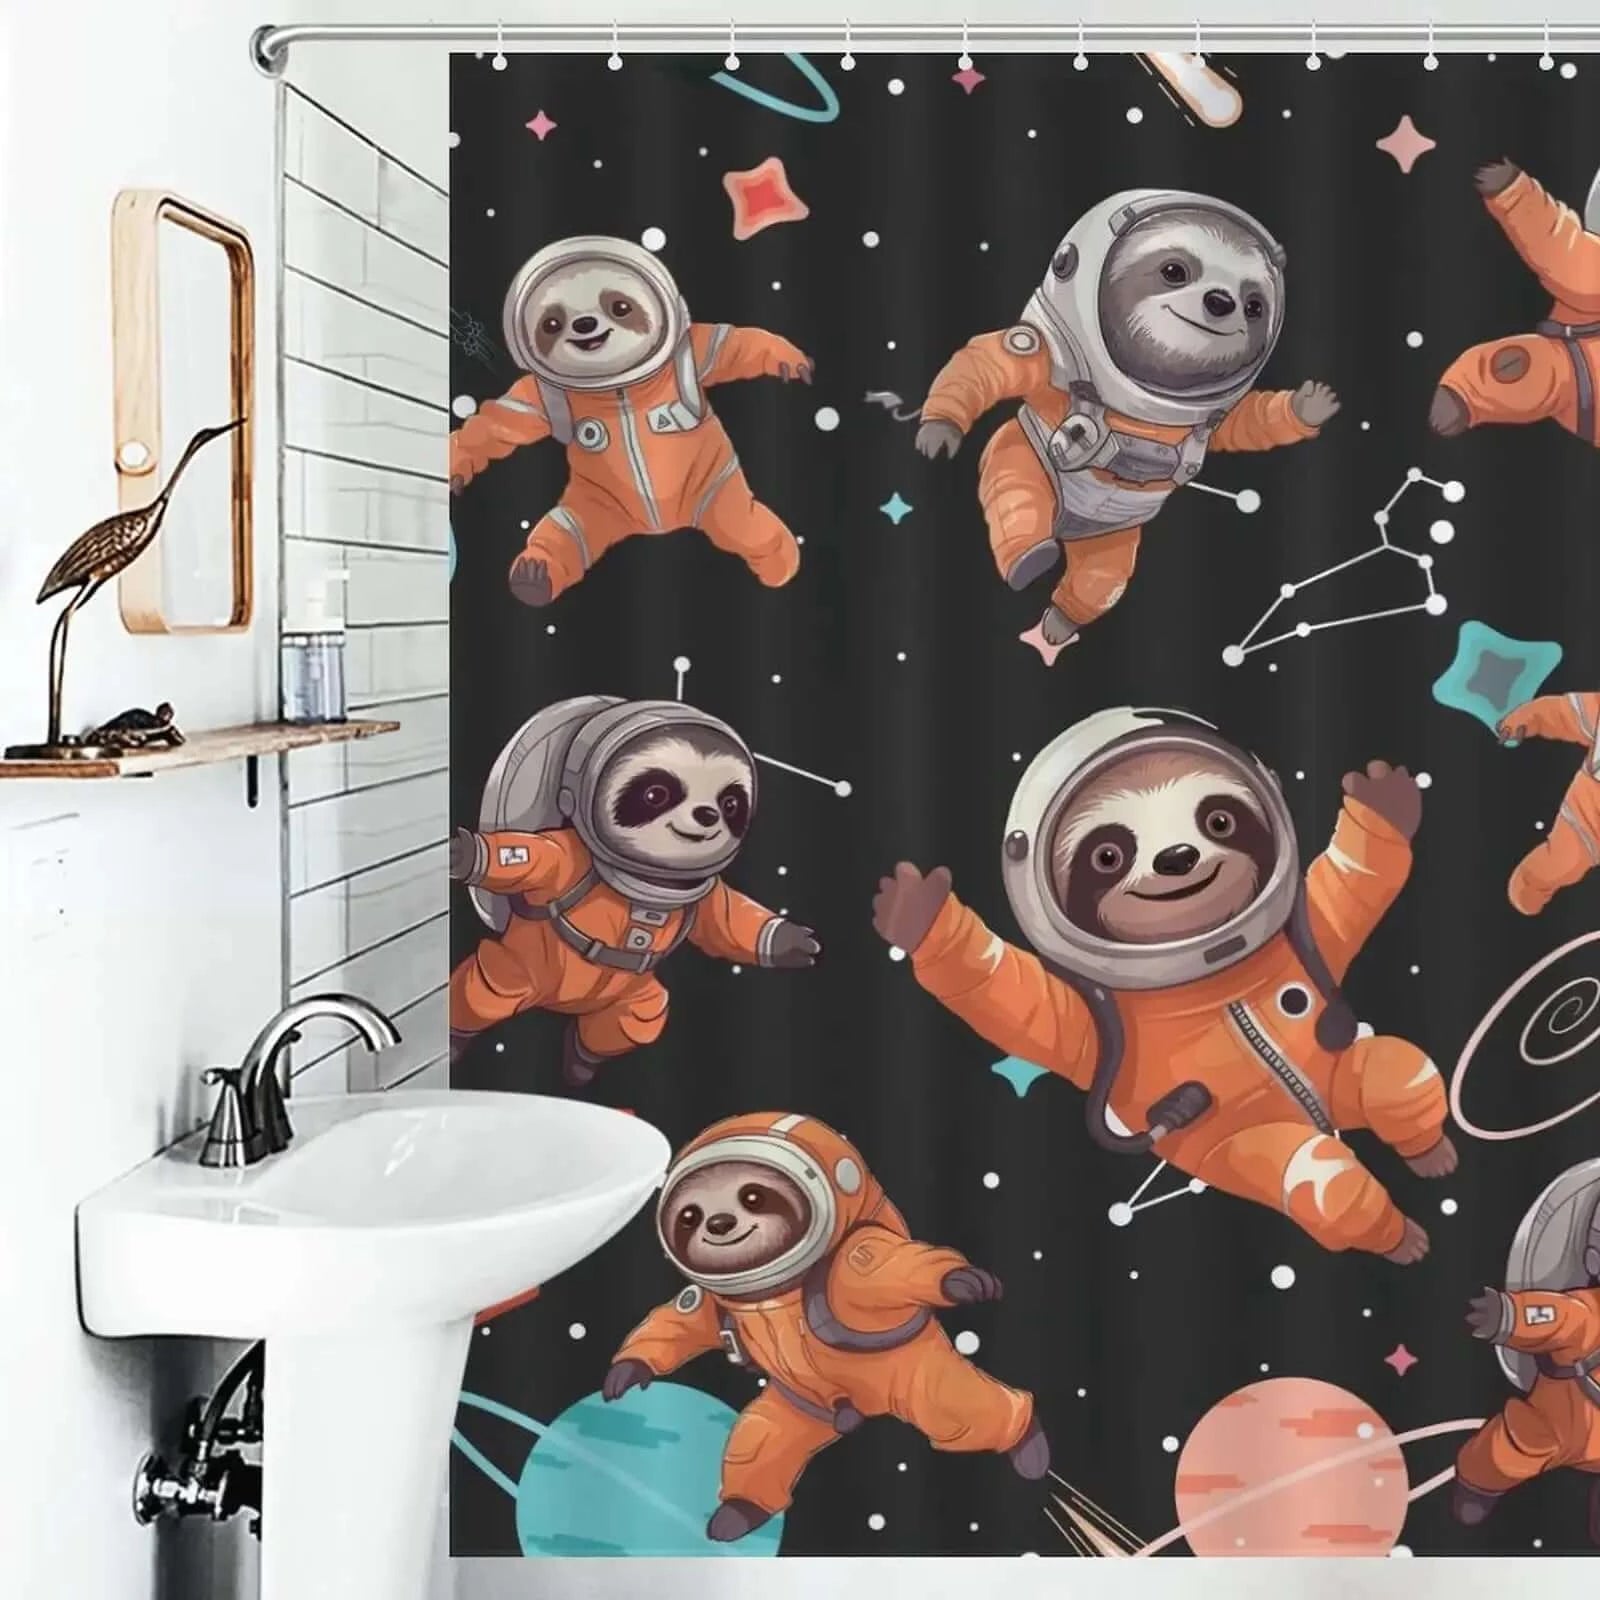 Add a touch of whimsy to your bathroom decor with this durable Sloth Astronauts Shower Curtain by Cotton Cat.